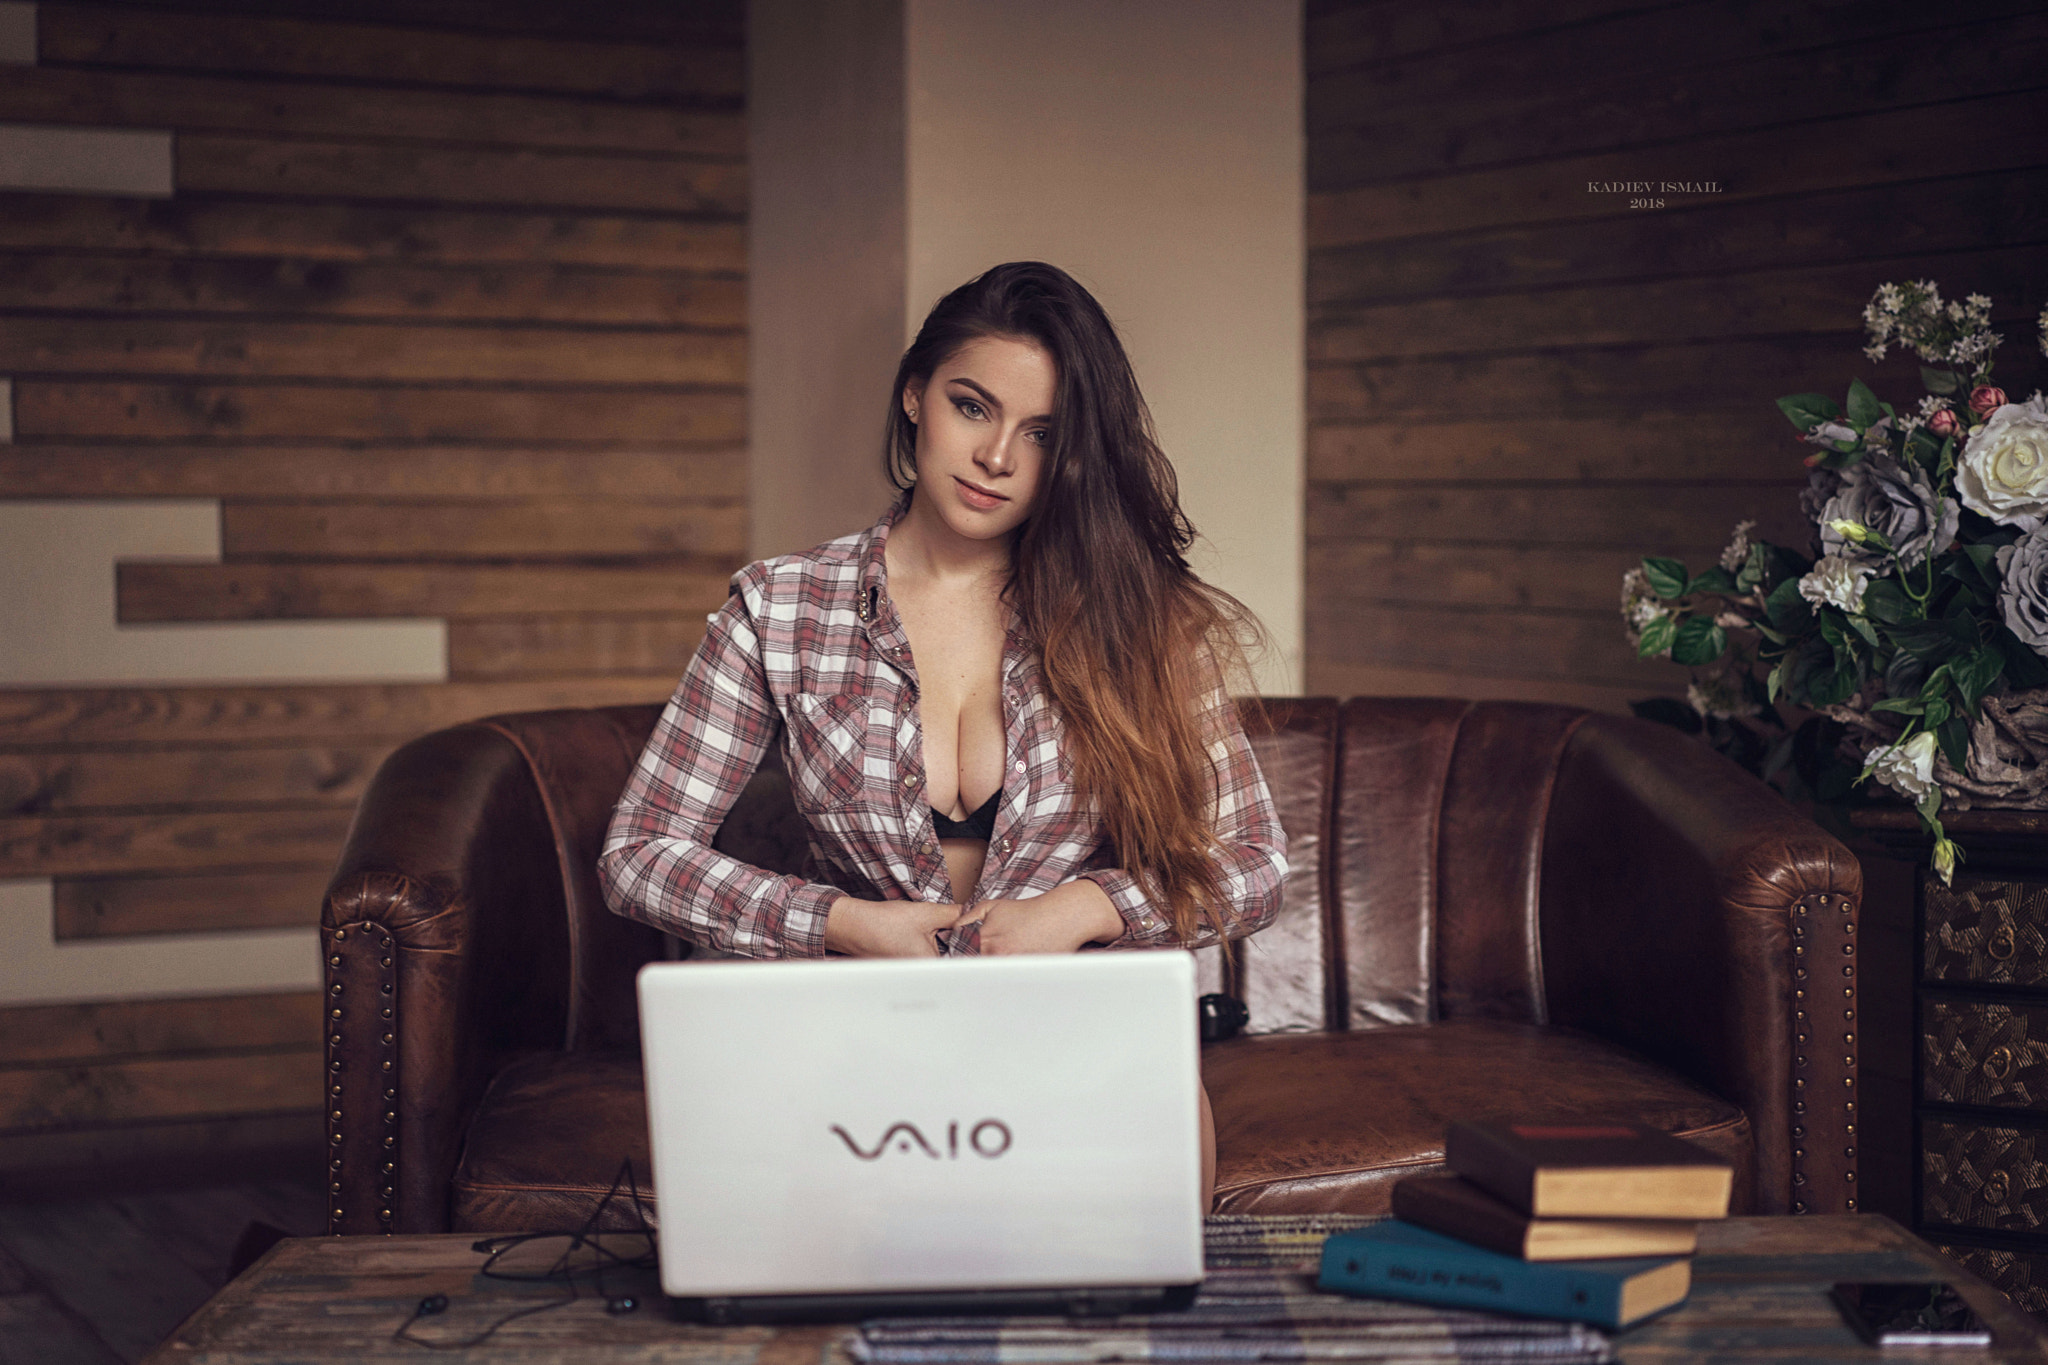 People 2048x1365 women plaid shirt VAIO laptop black bras couch portrait sitting smiling books brunette ombre hair Kadiev Ismail open shirt cleavage Maria boobs undressing technology long hair looking at viewer bra underwear